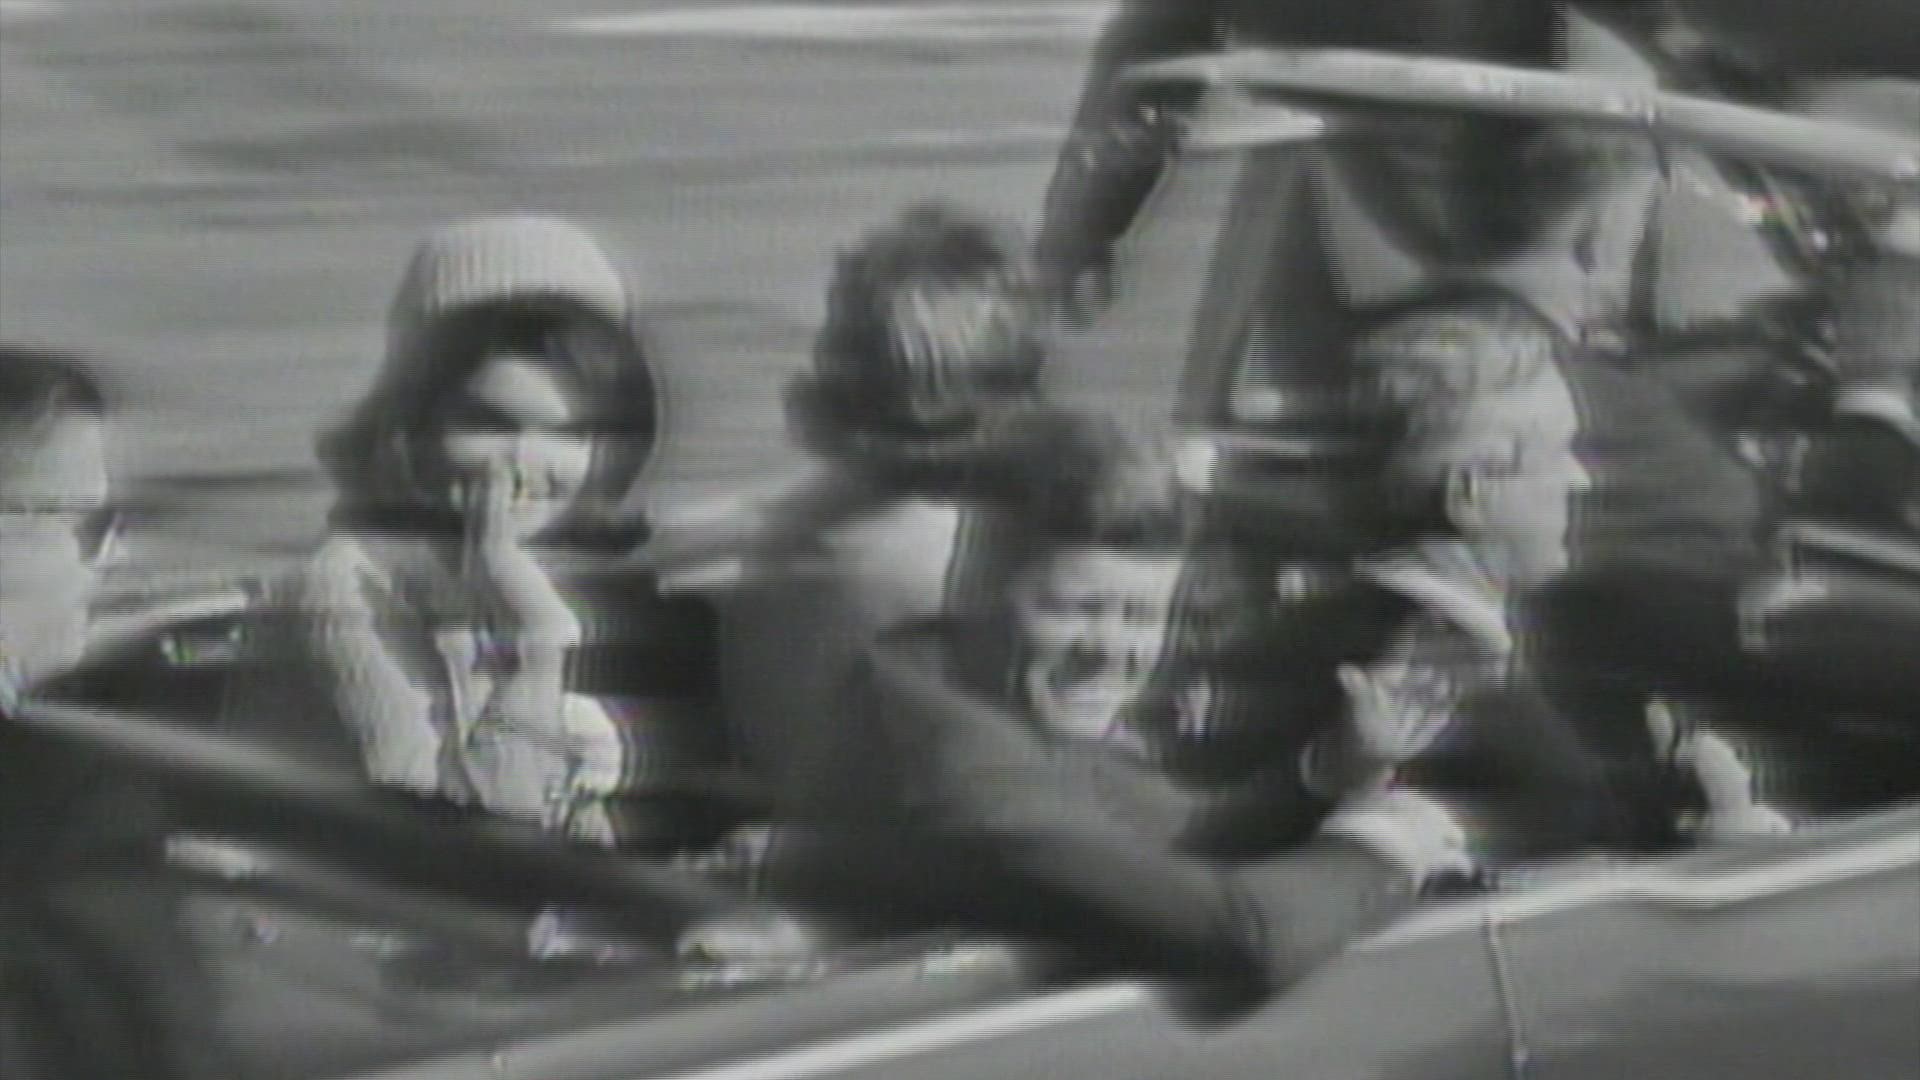 Shortly after noon on November 22, 1963, President John F. Kennedy was assassinated as he rode in a motorcade through Dealey Plaza in downtown Dallas, Texas.